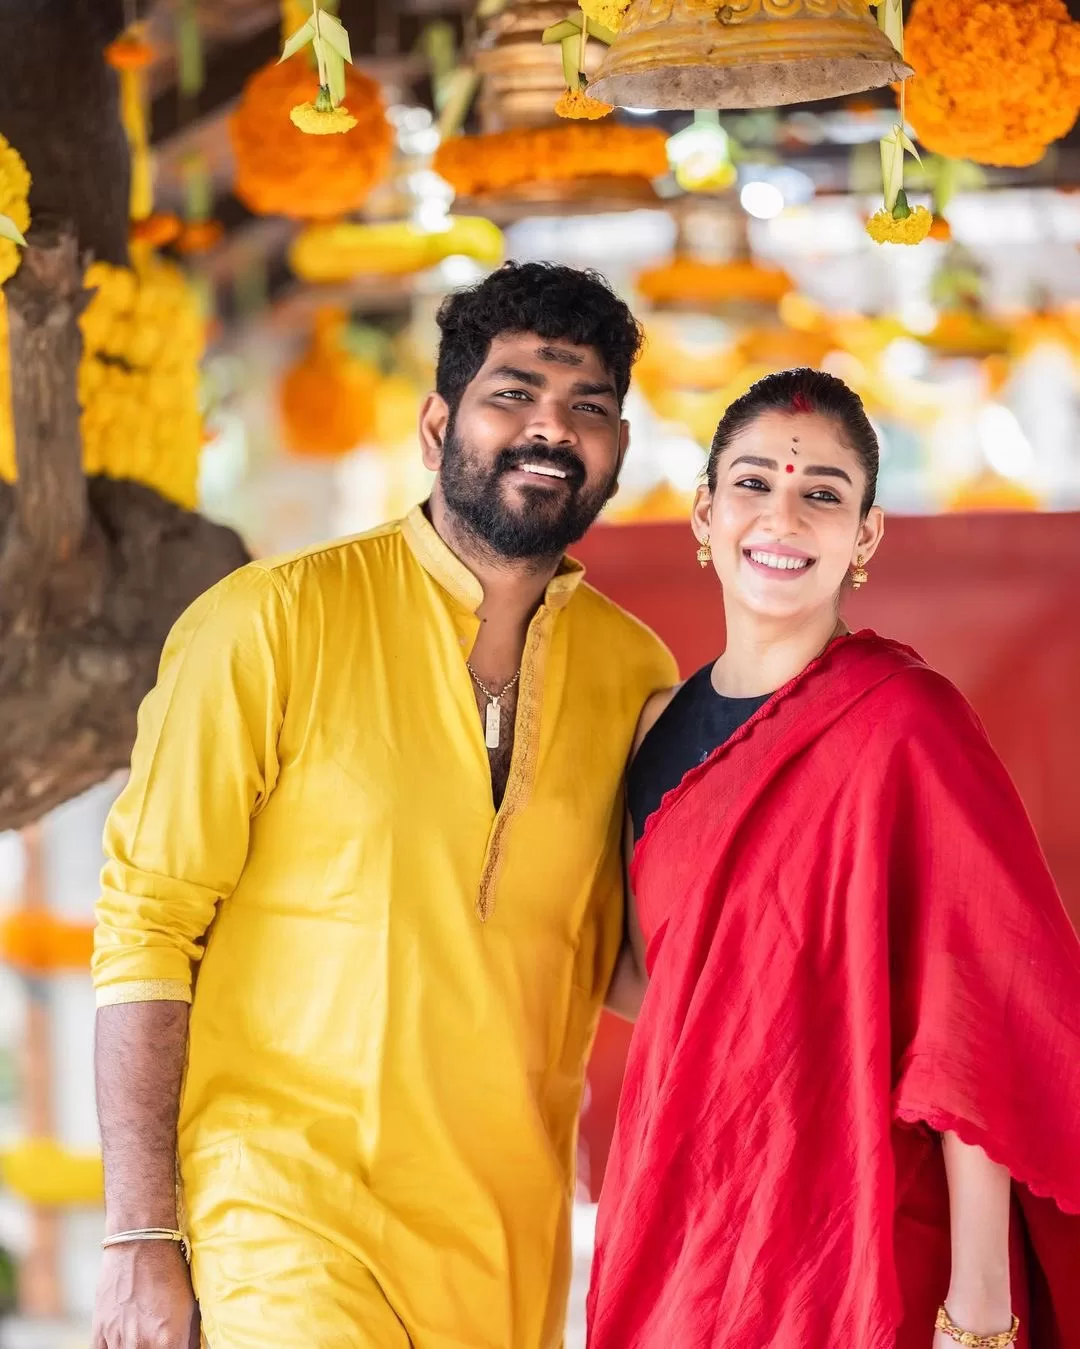 South Actress Nayanthara and Vignesh Shivan's Candid Moment Breaks the Internet: "Just Us" Nayanthara's Simple Yet Heartwarming Message on Social MediaNayanthara and Vignesh Shivan show love in a priceless honest way; they share a glimpse of a new starting. (PC: Nayanthara X (use to be Twitter)) Nayanthara, a major actress, and Vignesh Shivan, a well-known director, met on the sets of Naanum Rowdy Dhaan in 2015. It was said that they officially got married in 2016, but they kept this news about their lives a secret for six years. Finally, in June 2022, their fairy tale came true at a beautiful traditional wedding in Mahabalipuram, Chennai. Notable people from Indian film were there. The sweet couple recently shared a cute picture of themselves on social media. Nayanthara posed beautifully with Vignesh, who looked dapper in a golden kurta and white trousers. She was wearing a red saree with a black top, beautiful statement jewellery and her hair was tied back. People all over the internet fell in love with their genuine happiness and love for each other. Nayanthara posted the sweet photos on X (which used to be Twitter) with the simple but truly heartwarming text "Just Us." She put a heart next to the comment and added it. Adorable Photo of Nayanthara and Vignesh Shivan Captivates Attention Upcoming project of Nayanthara Nayanthara and Jai worked together on the hit movie Raja Rani in 2013. Their new project, Nayanthara Annapoorani - The Goddess of Food, which opened on December 1, brings them back together. The movie, which was directed by Nilesh Krishnaa for the first time, is about a young woman named Poorani who comes from a strict Brahmin family and wants to become a cook in a field that is mostly men. The movie's catchy teaser and touching music hint at a strong social message, set against a background of food dreams and family problems. Zed Studios, Naad Studios, and Trident Arts have all backed this exciting project. The skilled Thaman S is in charge of music, and Sathyan Sooryan is in charge of cinematography. They are all in S. Sashikanth's movie Test together with Madhavan, Sidharth, and Meera Jasmine. The interesting group of characters gives hints of an interesting story, but plot details are being kept secret. Nayanthara and Vignesh Shivan's Candid Moment Breaks the Internet: "Just Us" Nayanthara's Simple Yet Heartwarming Message on Social Media 